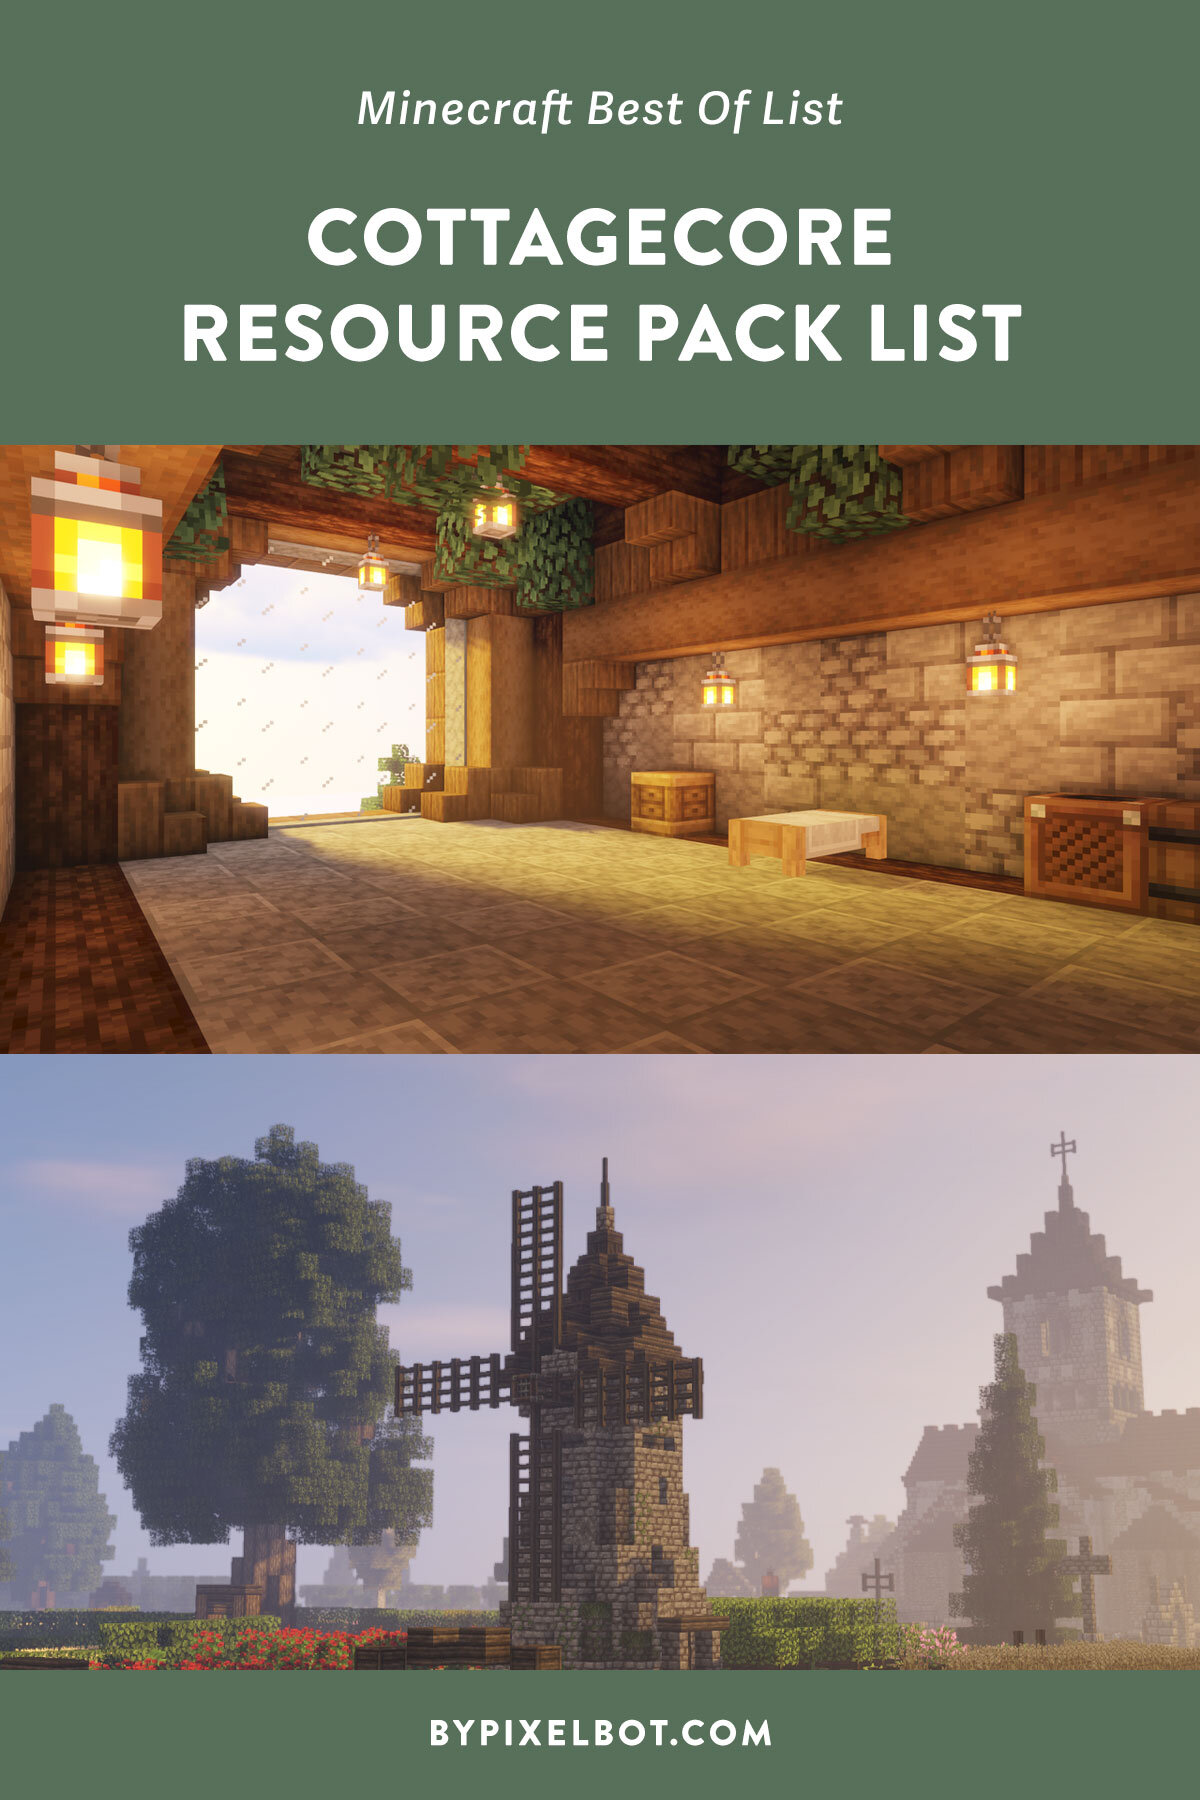 The Ultimate Guide to Installing Minecraft Resource Packs